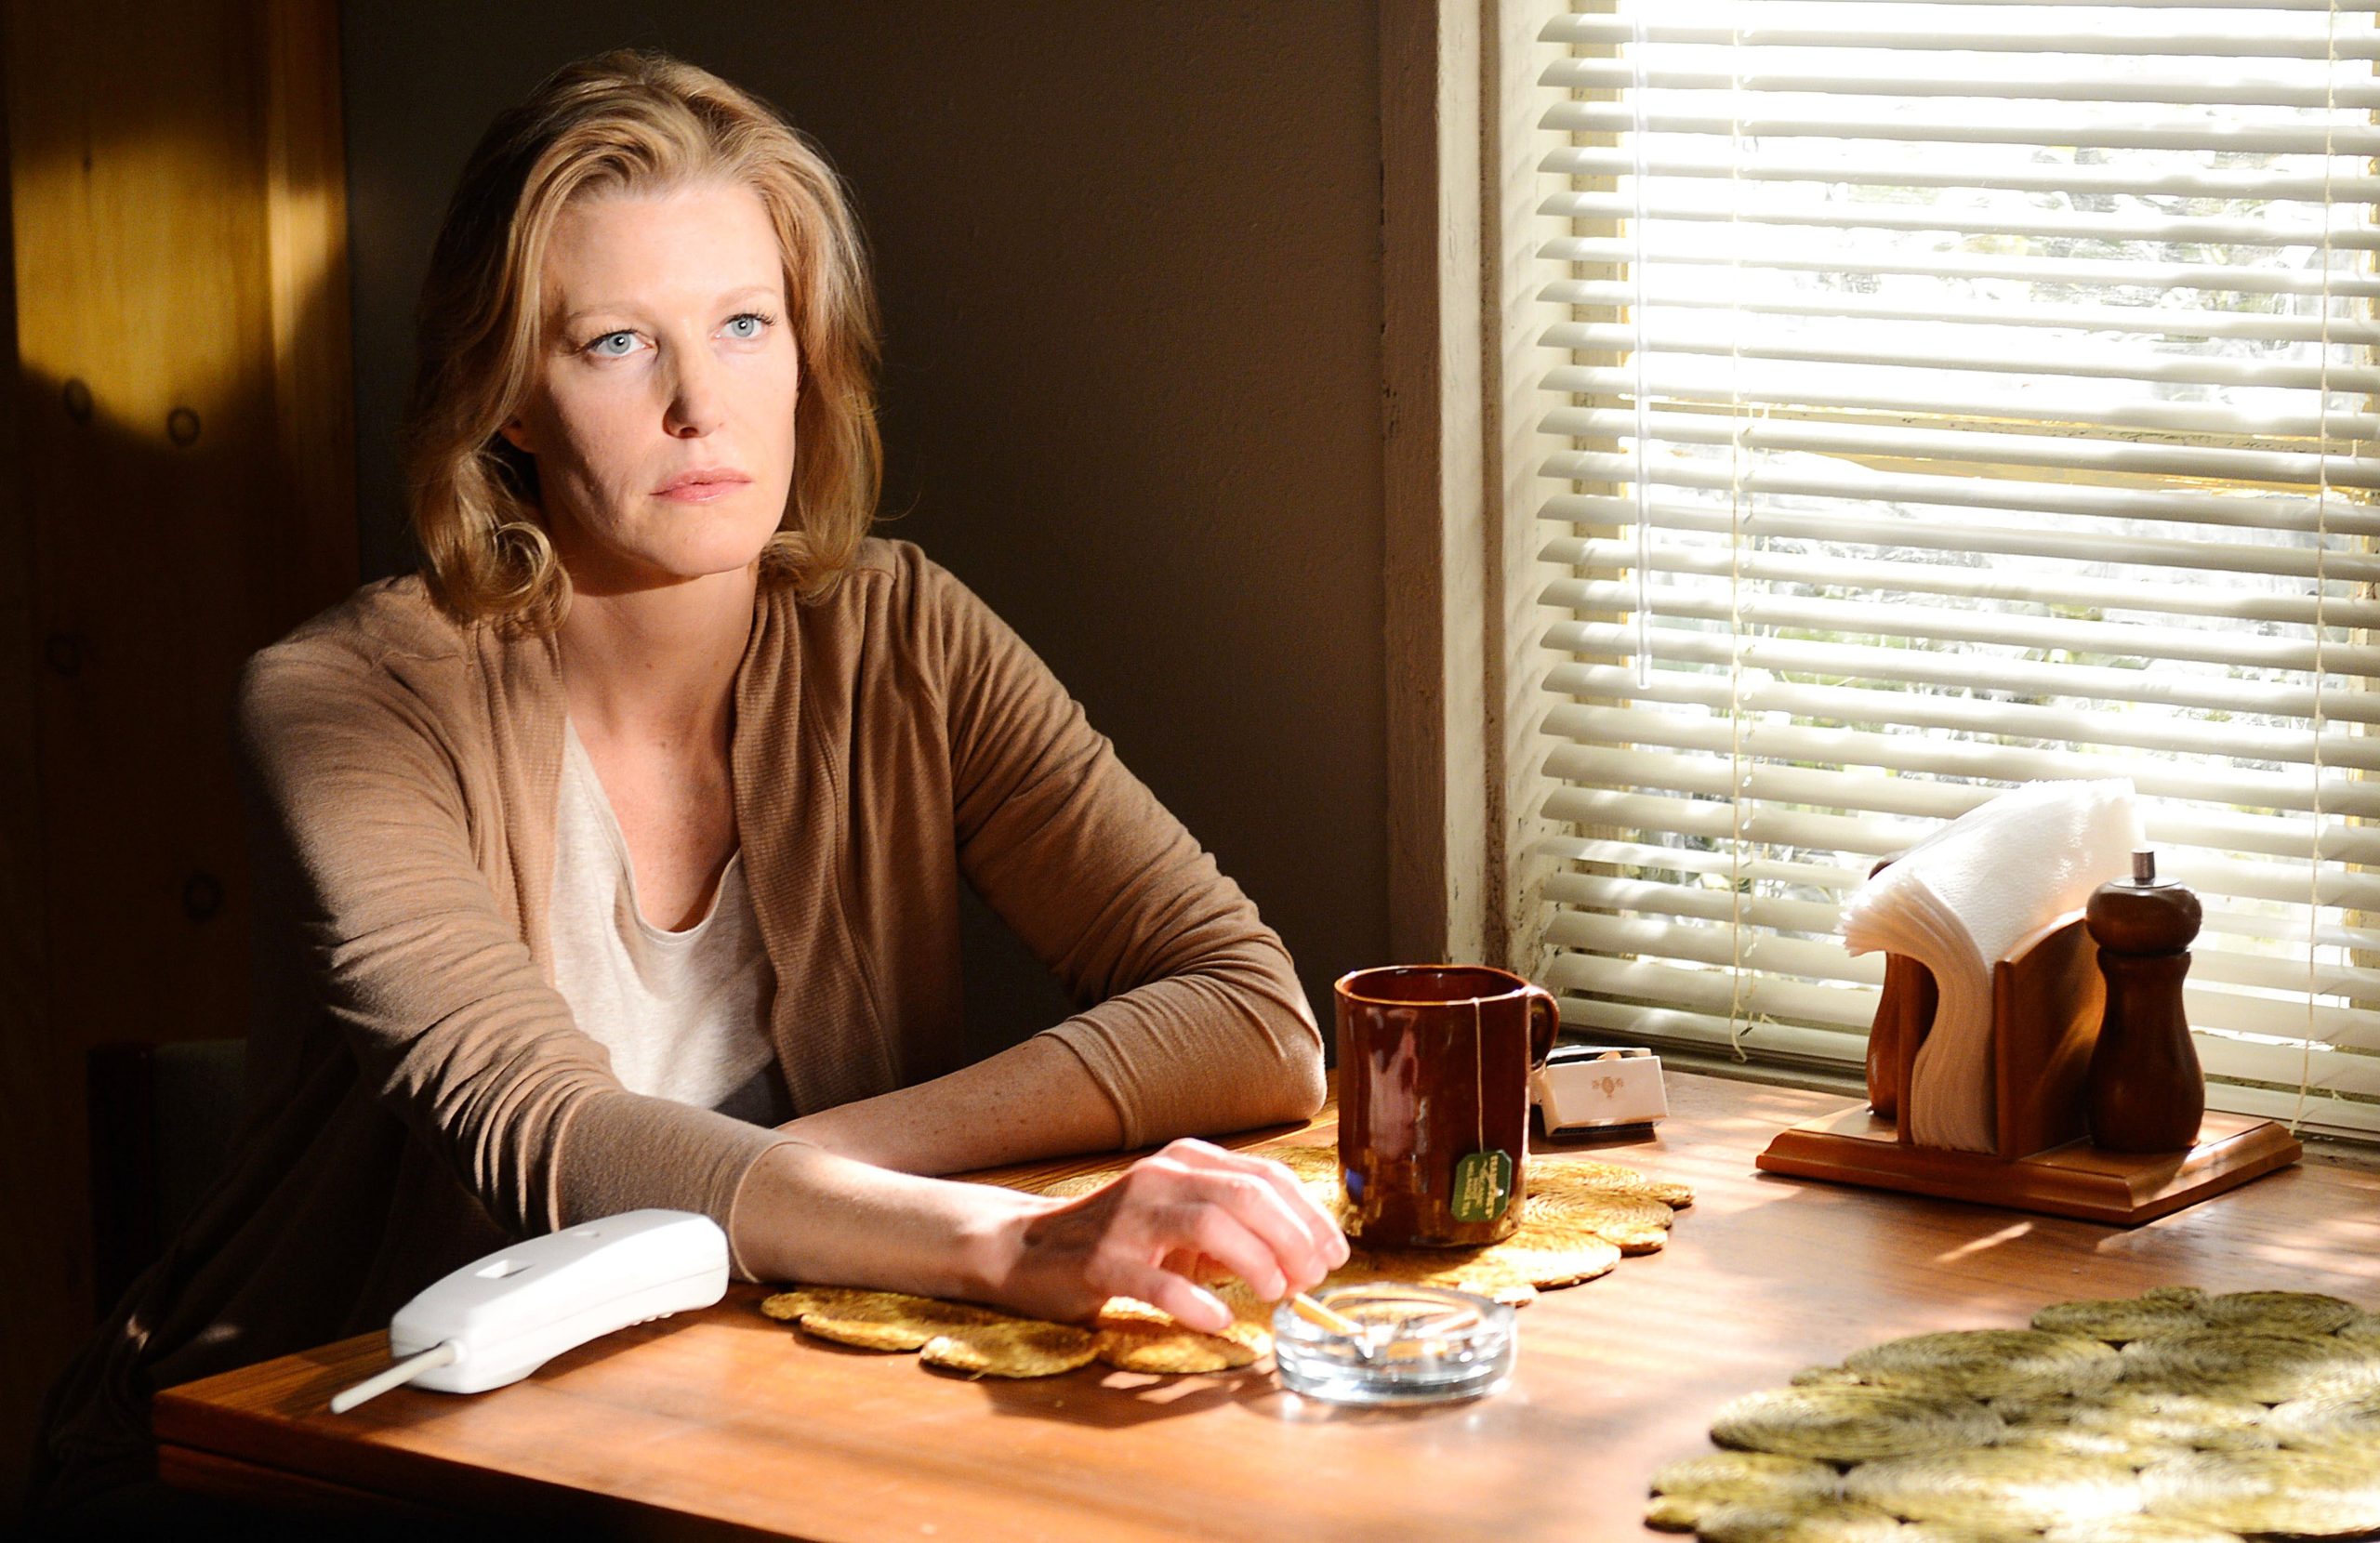 Skyler White from Breaking Bad sitting at her table, smoking a cigarette, and looking intensely at Walter White who is not in the frame.  